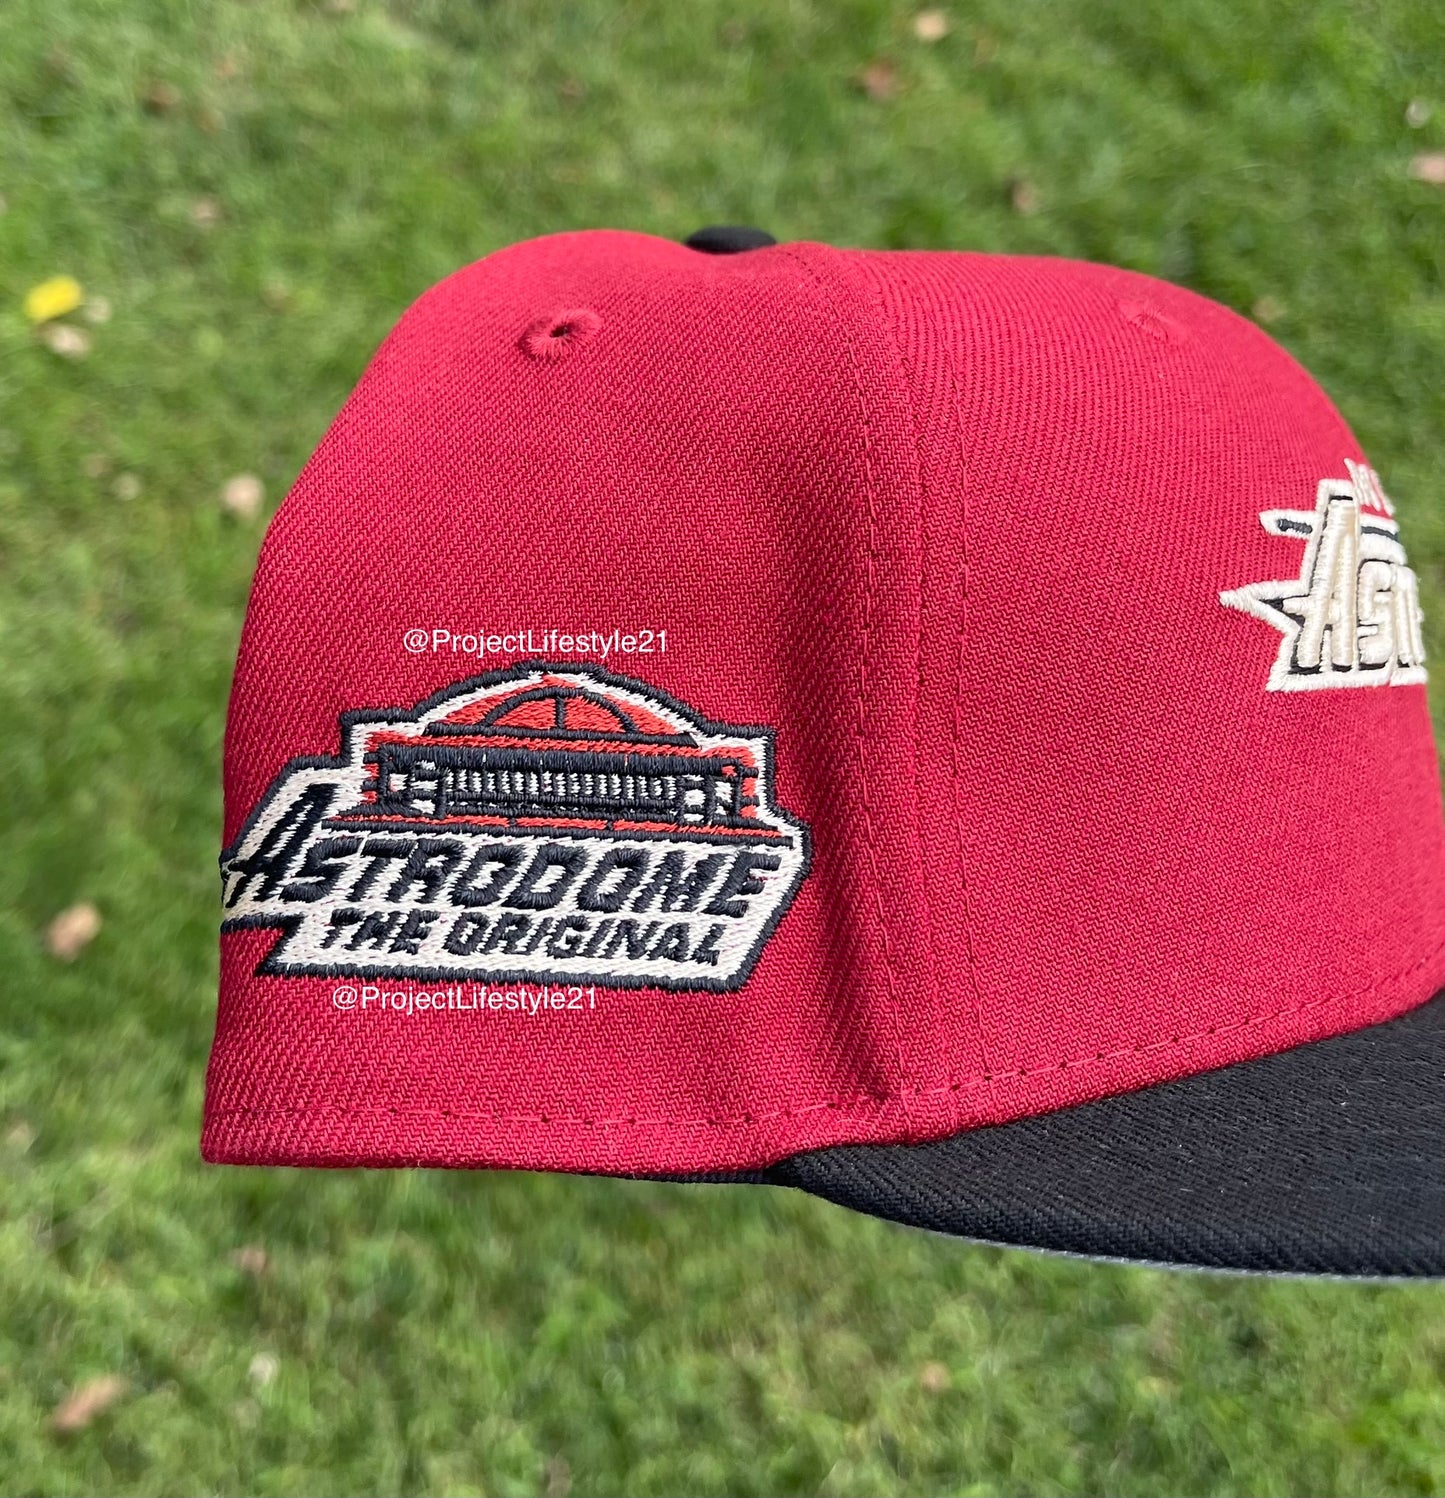 Houston Astros Astrodome Patch Fitted Hat (Brick Red/Black)